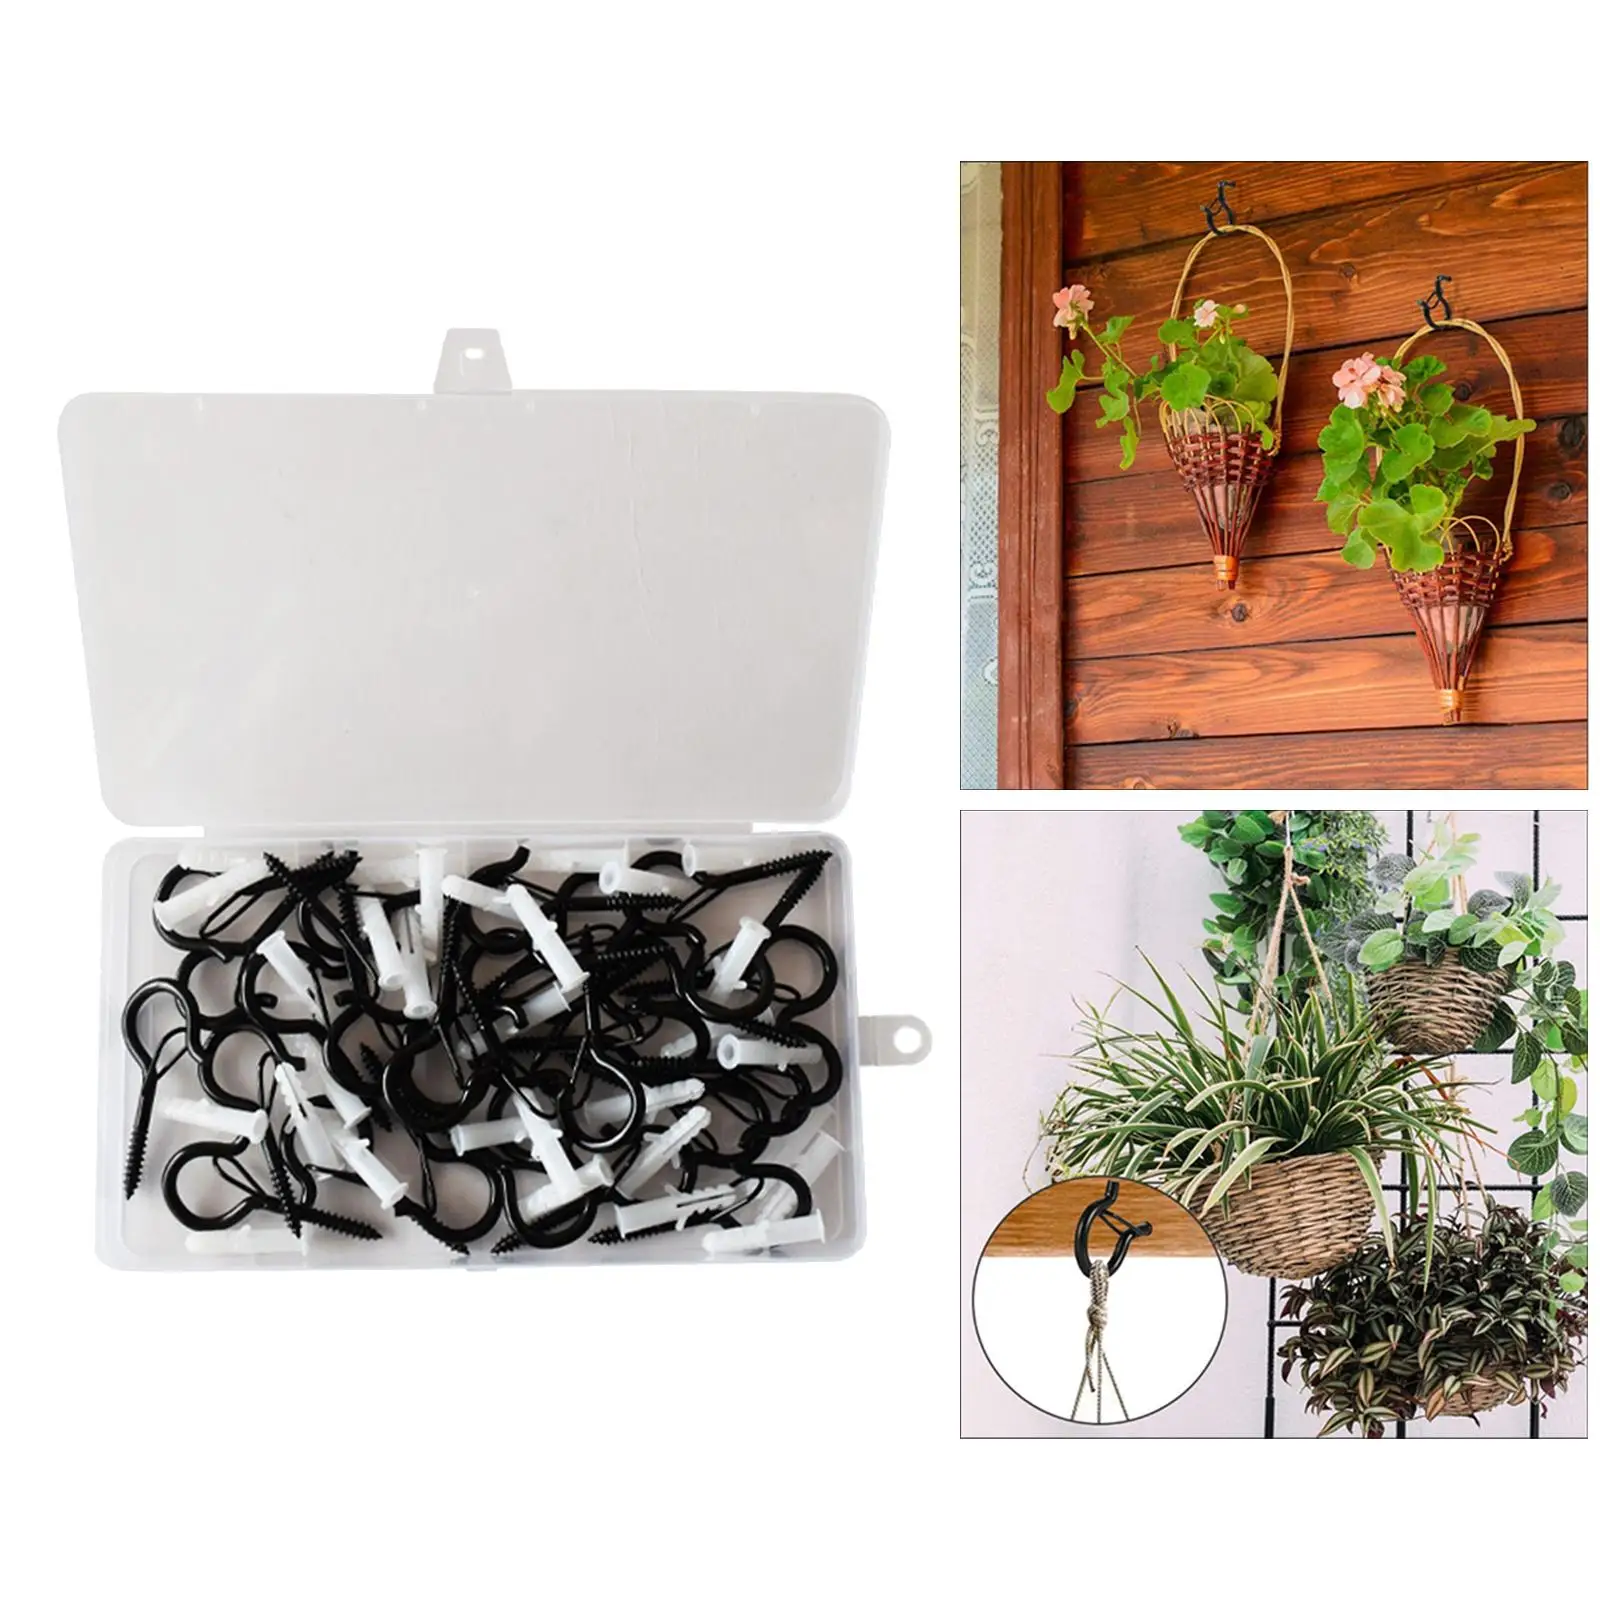 36Pcs Ceiling Q-Hanger Hooks Outdoor Windproof Home 2 Inches Screw Hanger for Party Wind Chimes Plants String Lights Black